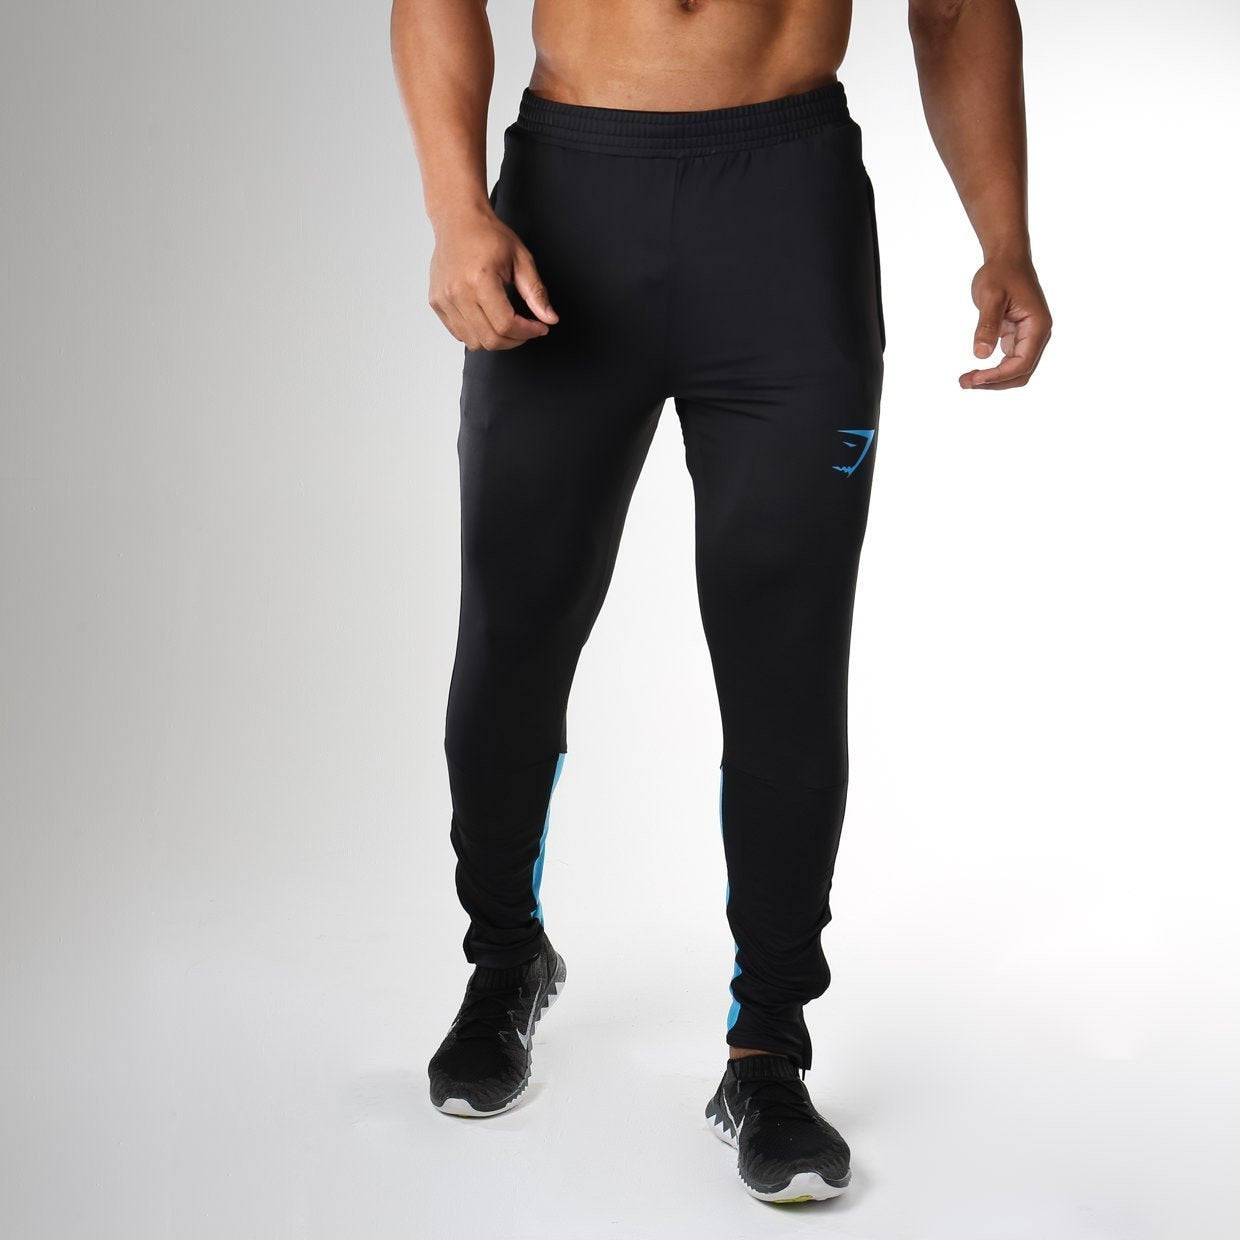 Reactive Training Pant in Black/Blue - view 1